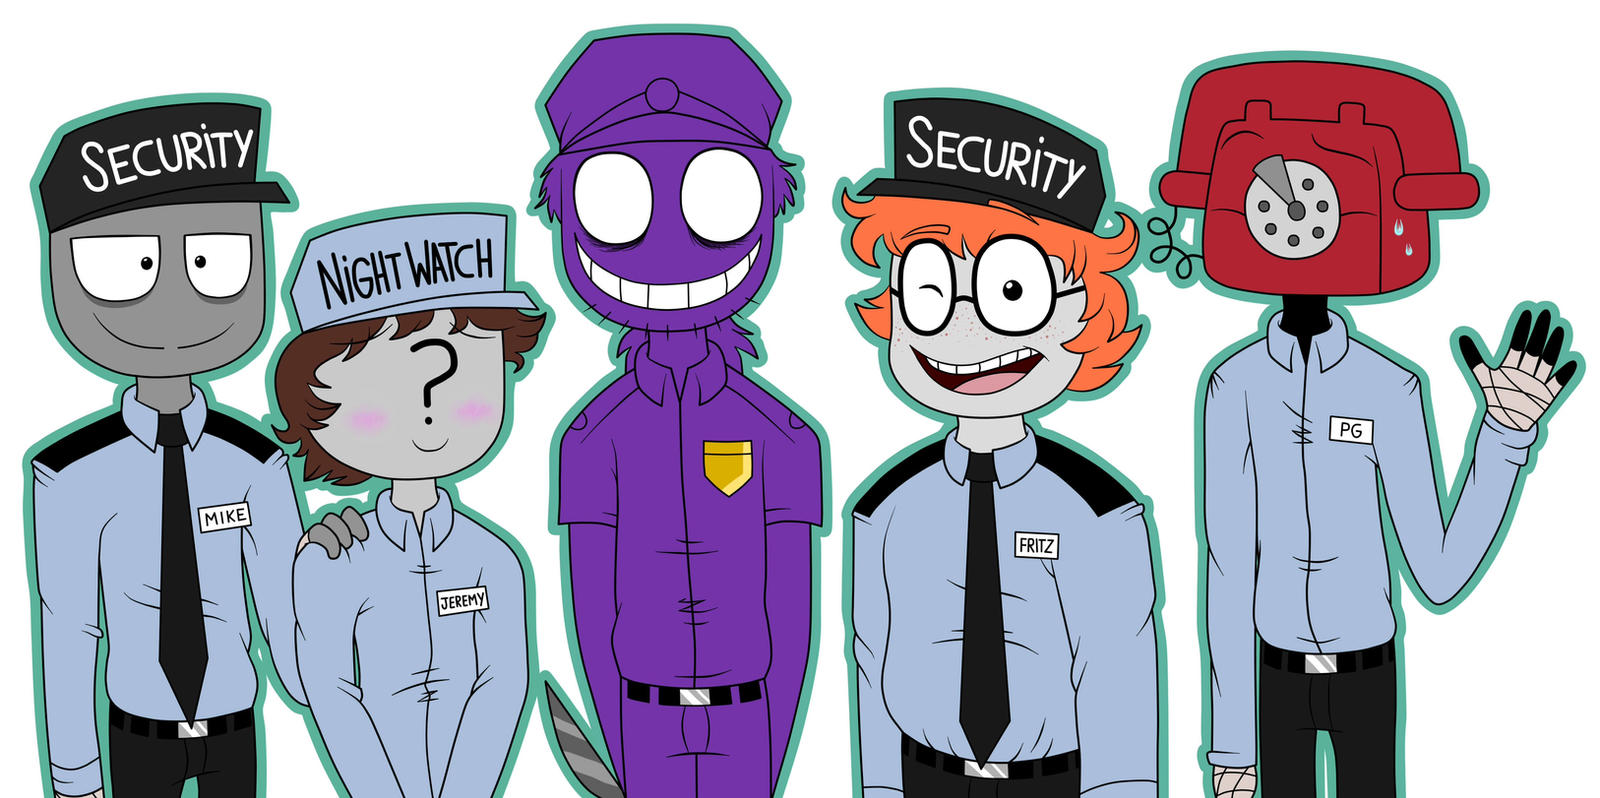 The Security Guards by MLPegasis4898 on DeviantArt.